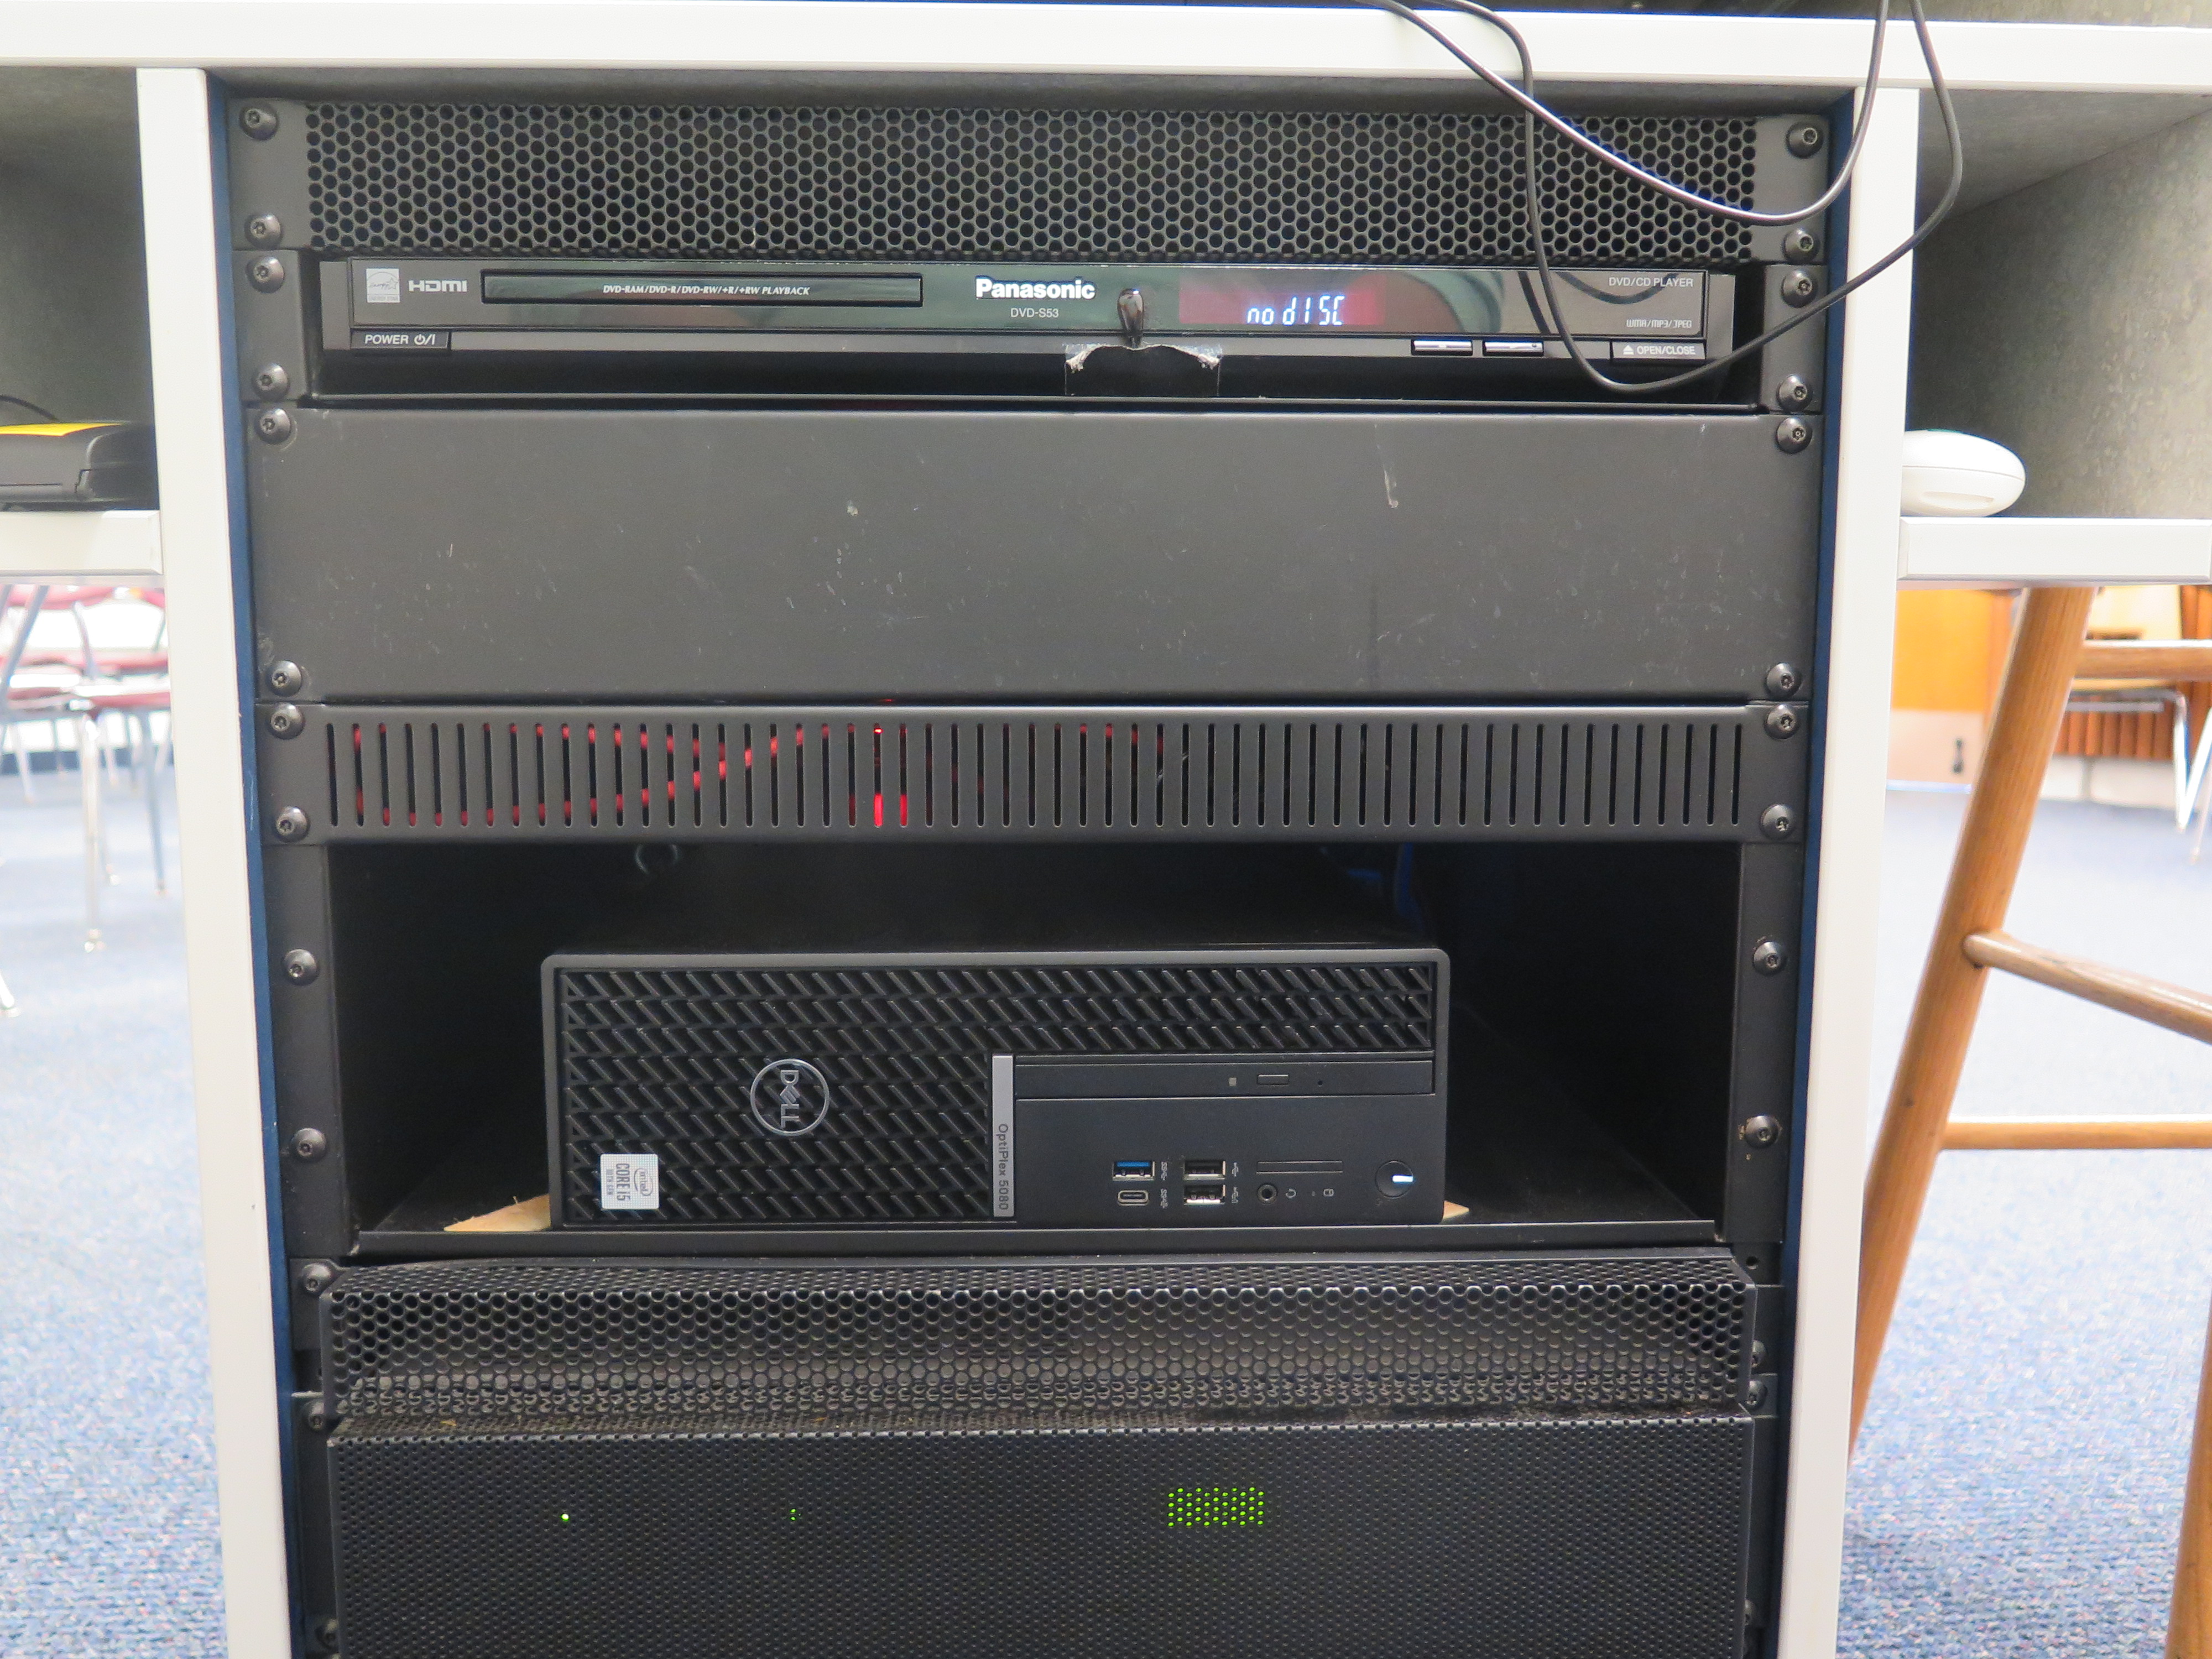 Display rack consists of a DVD player and Dell Computer CPU.